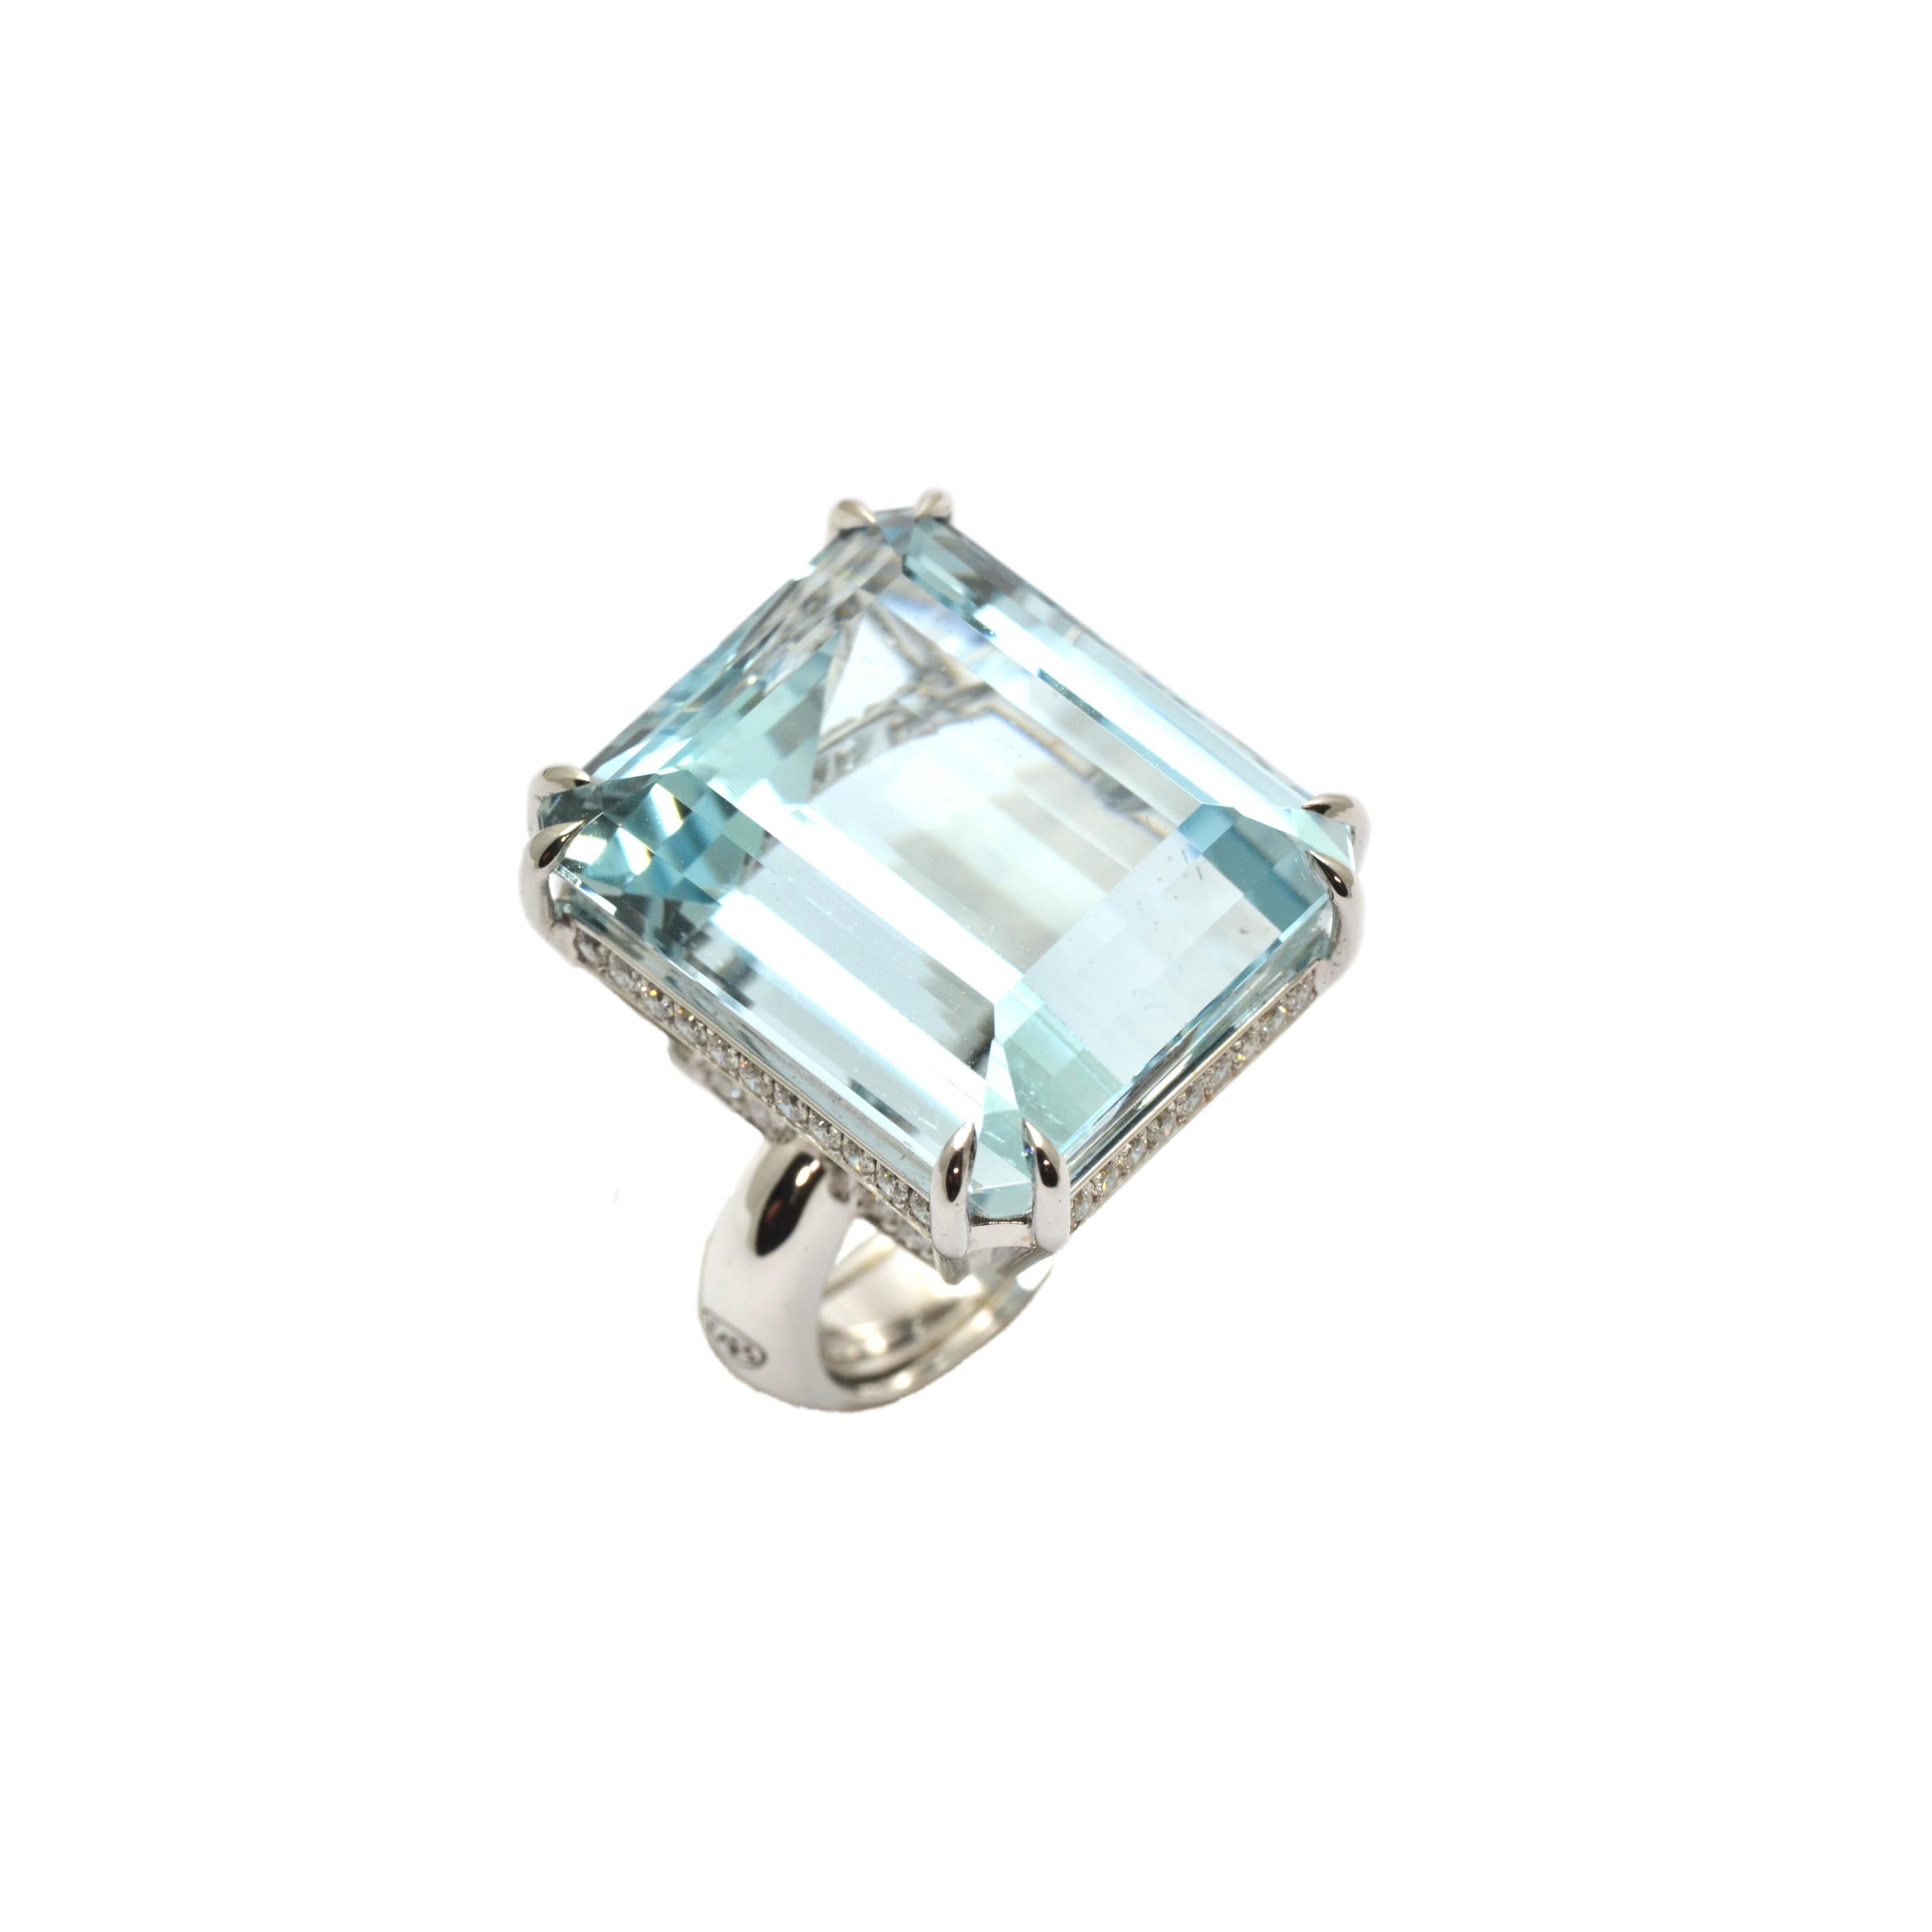 Aquamarine Diamond 18 KT White Gold Made in Italy Cocktail Ring For Sale 2